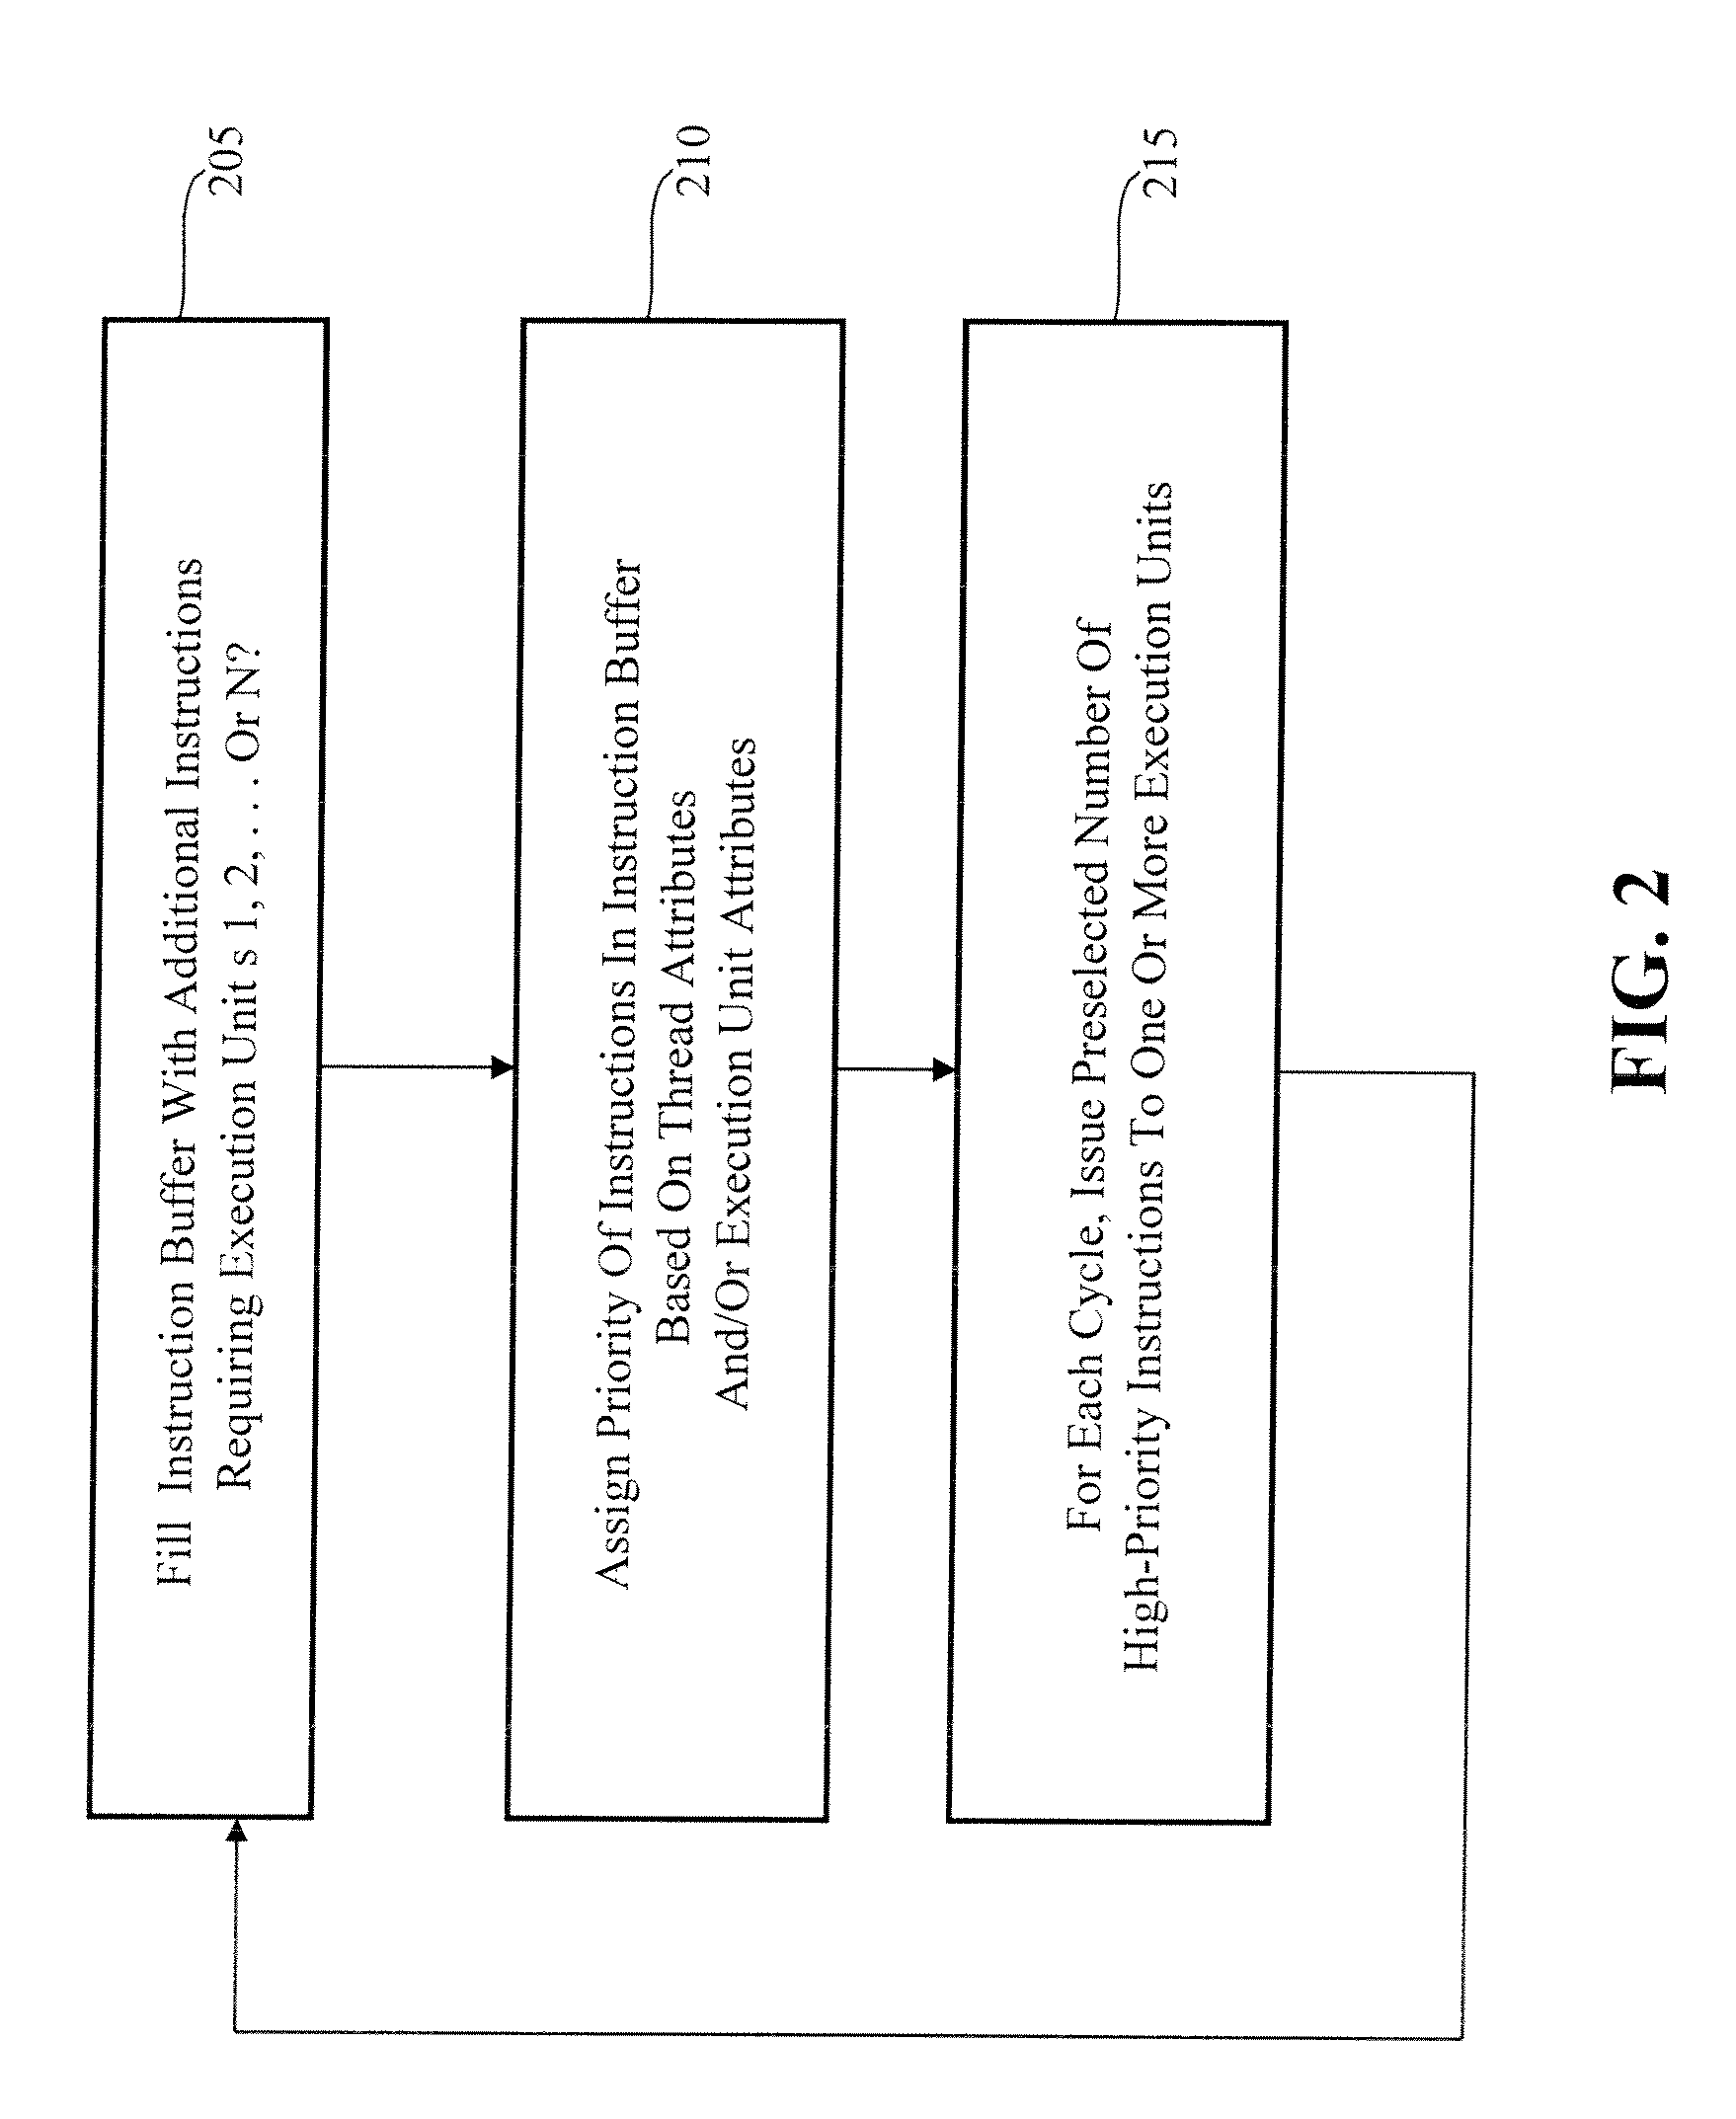 Prioritized issuing of operation dedicated execution unit tagged instructions from multiple different type threads performing different set of operations